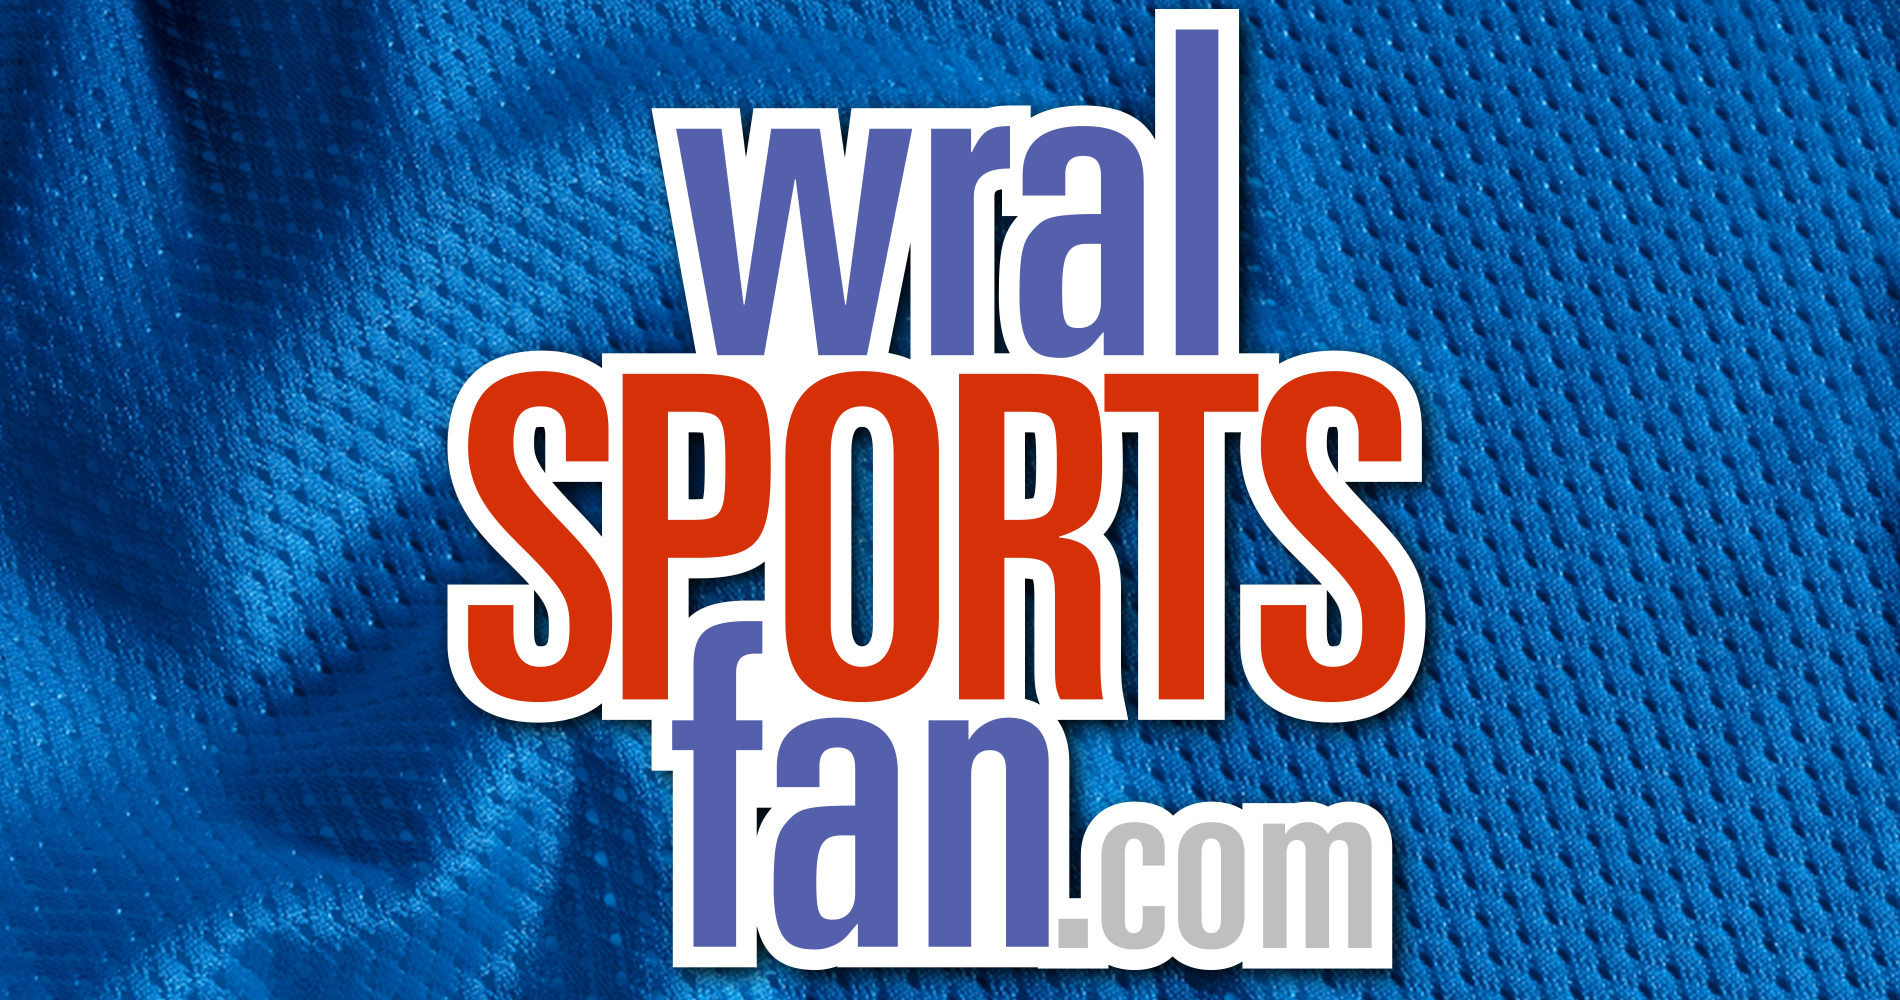 The Panthers emerged victorious, causing frustration among coaches and earning Chef Curry a spot in the top sports moments of the week on WRALSportsFan.com.